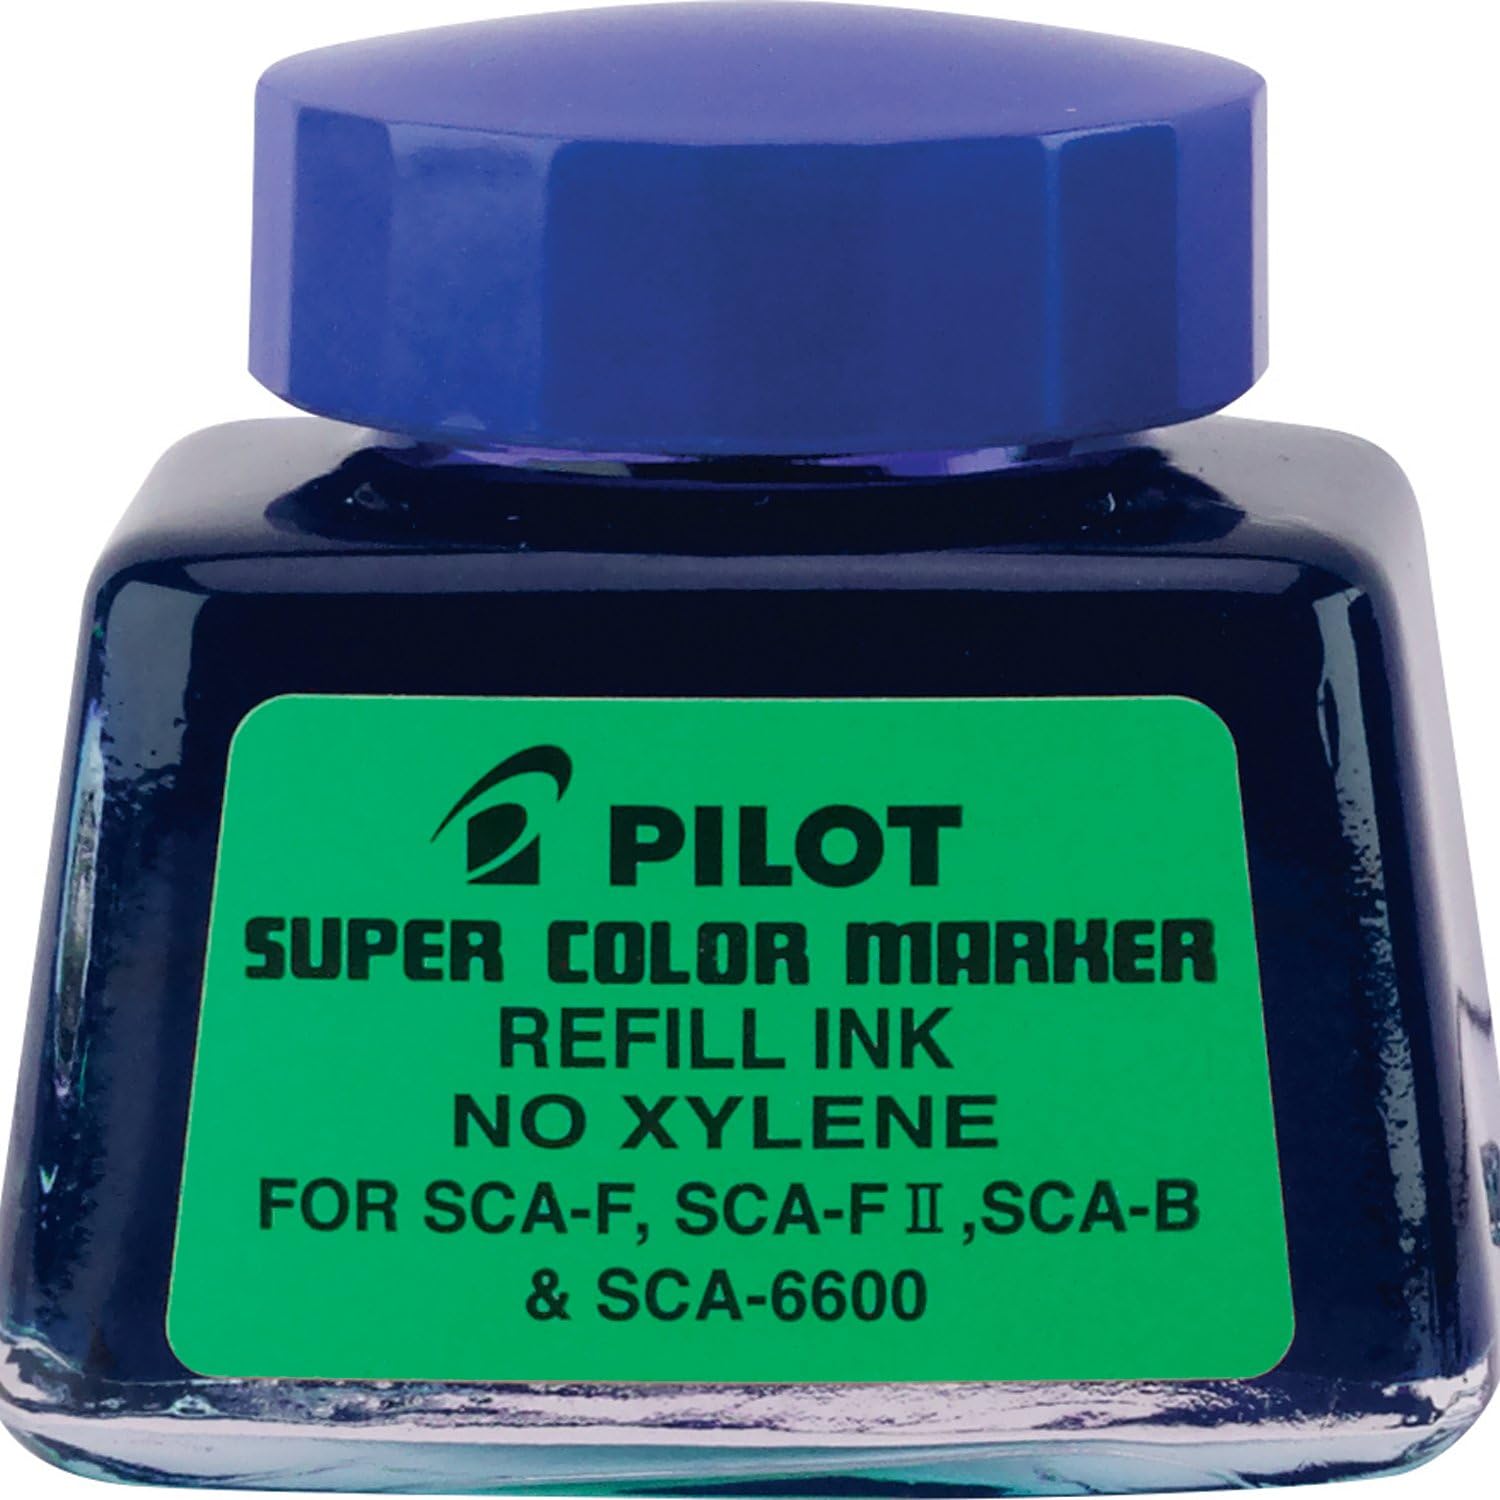 PILOT Super Color Permanent Marker Refill Ink, Xylene-Free, 1 Ounce Bottle with Dropper, Blue Ink (48600)